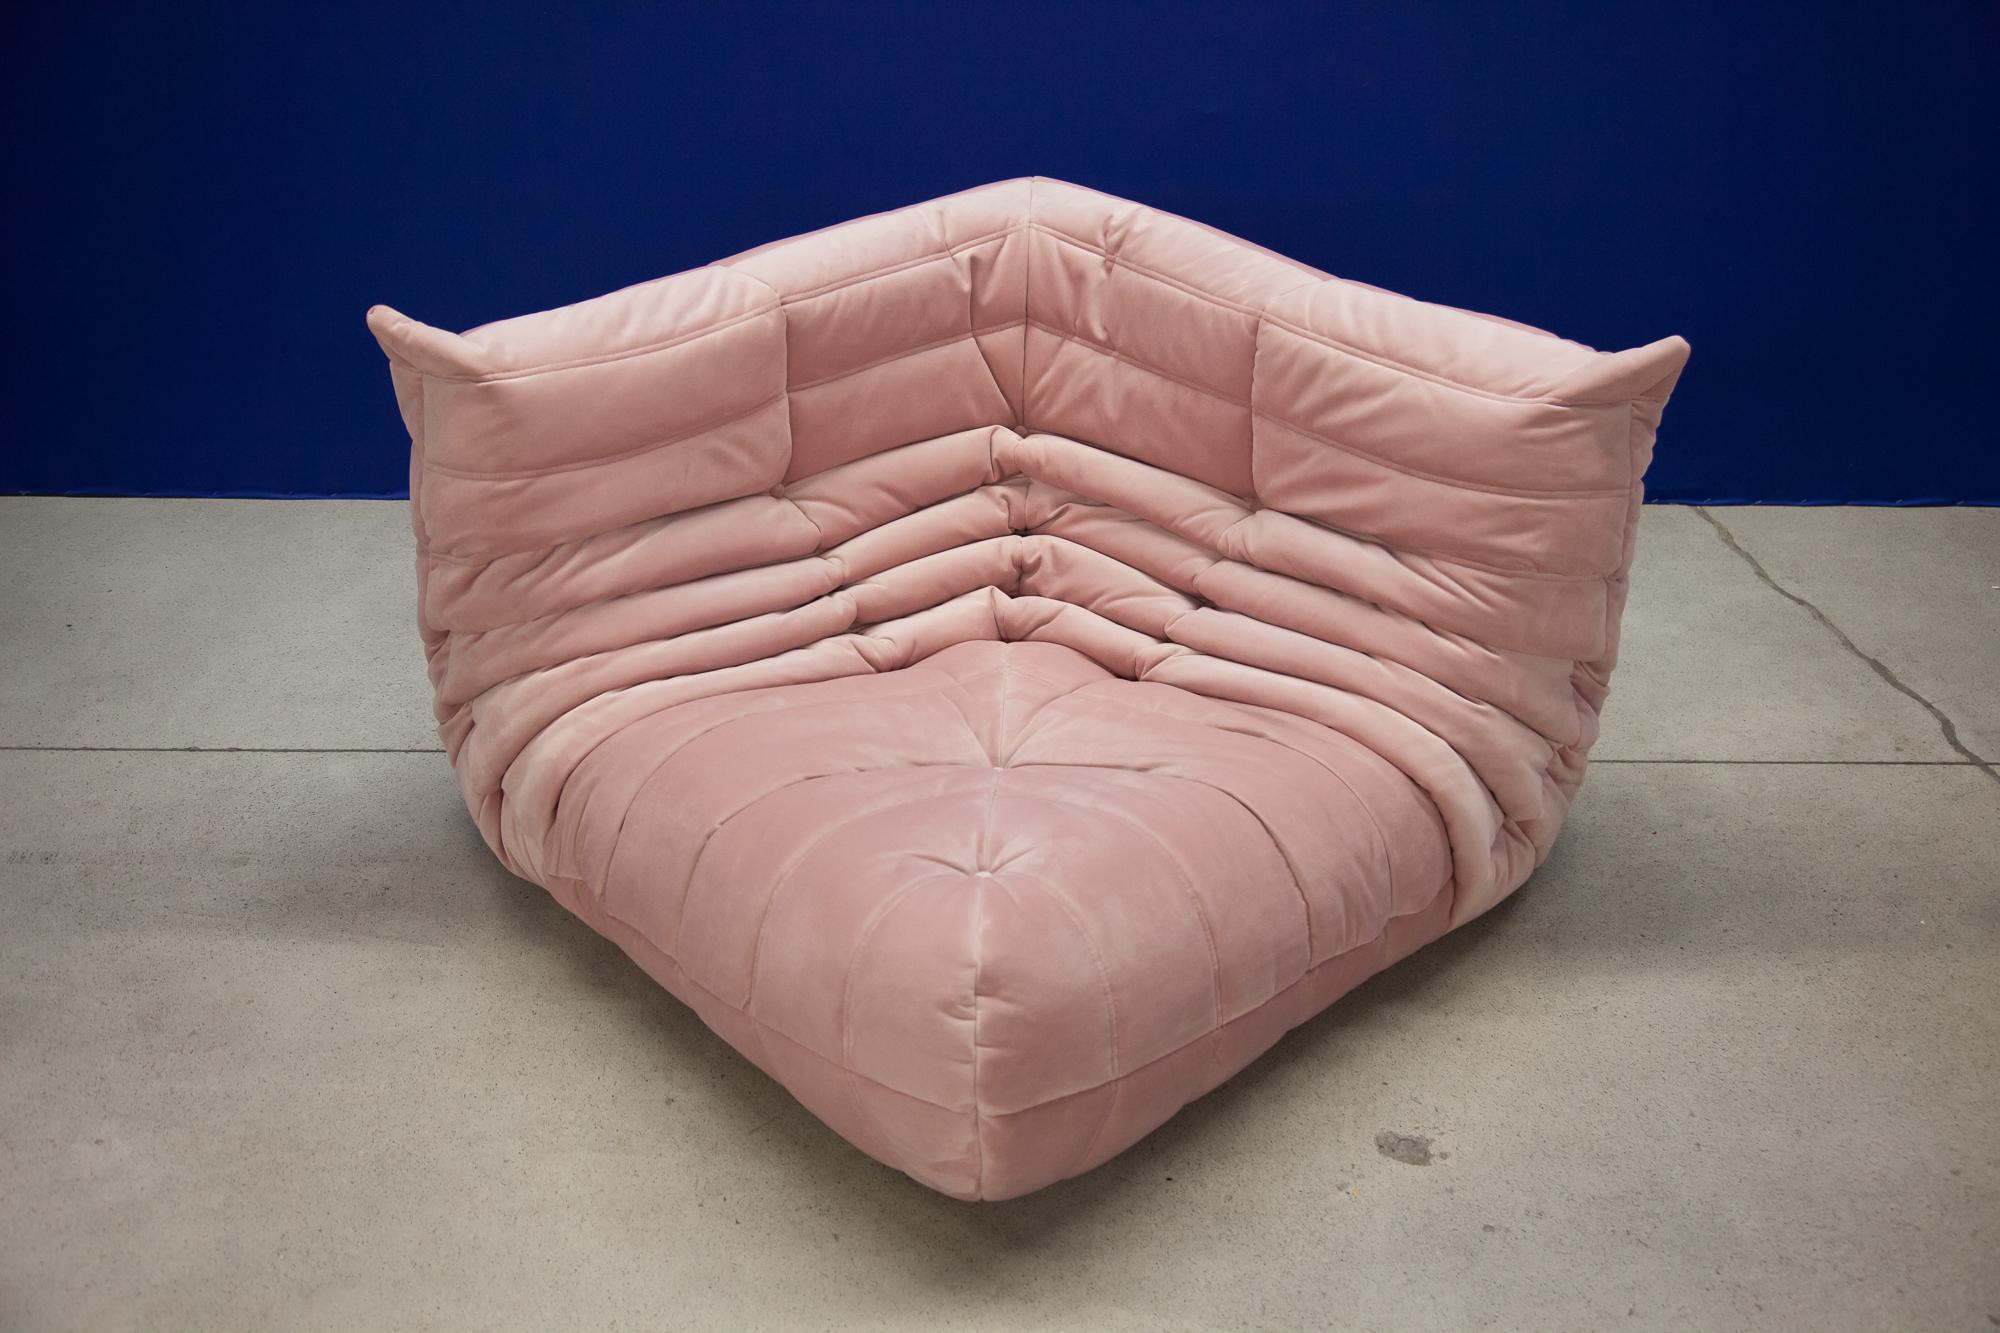 This Togo set including: 3-Seat, 2-seat and corner were designed by Michel Ducaroy in 1973 and were manufactured by Ligne Roset in France. It has been reupholstered in new pink velvet (70 x 174 x 102 cm). It has the original Ligne Roset logo and